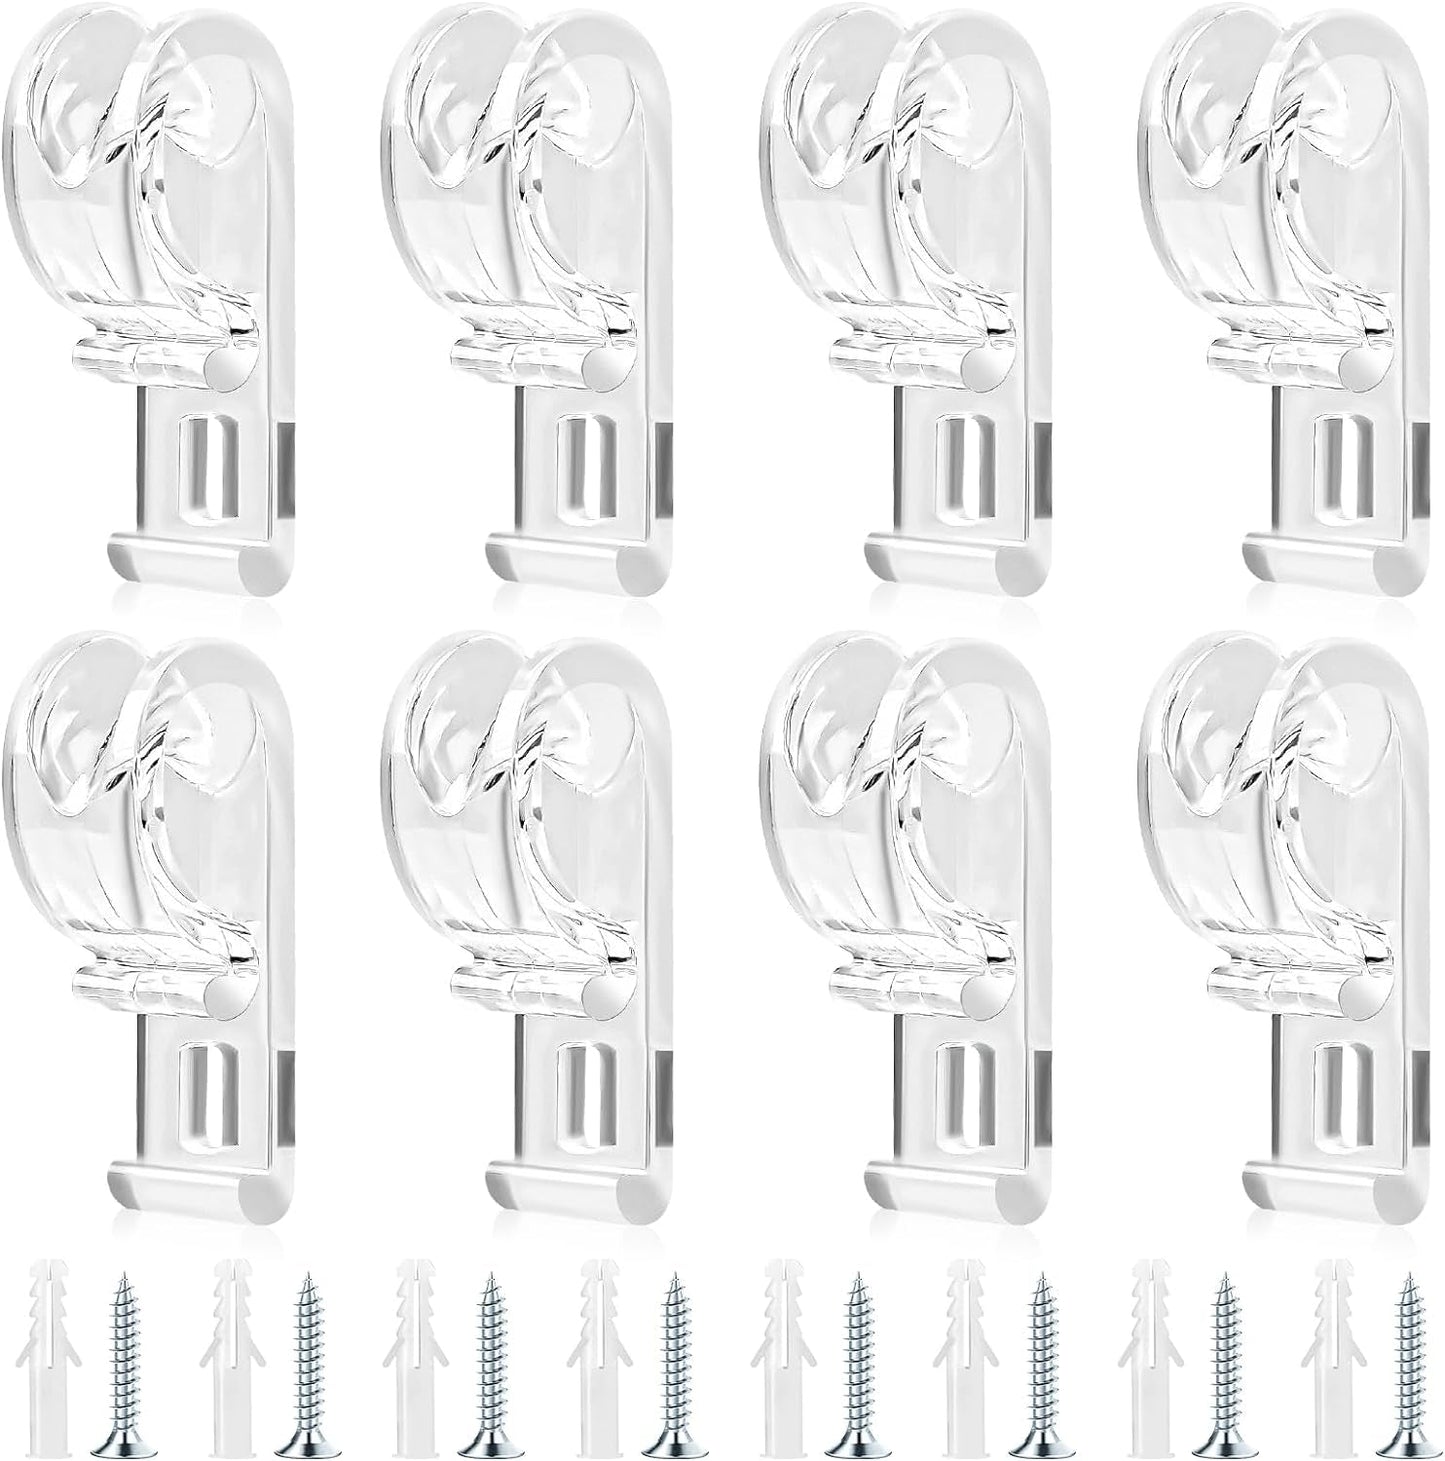 8 Pcs Roller Shade Clear Saftey Chain Retainer and Cord Guide Curtain P Clip Blind Cord Holder, Fixation Hook Bead Chain Tension Device with Screws for Roller Vertical and Roman Shades